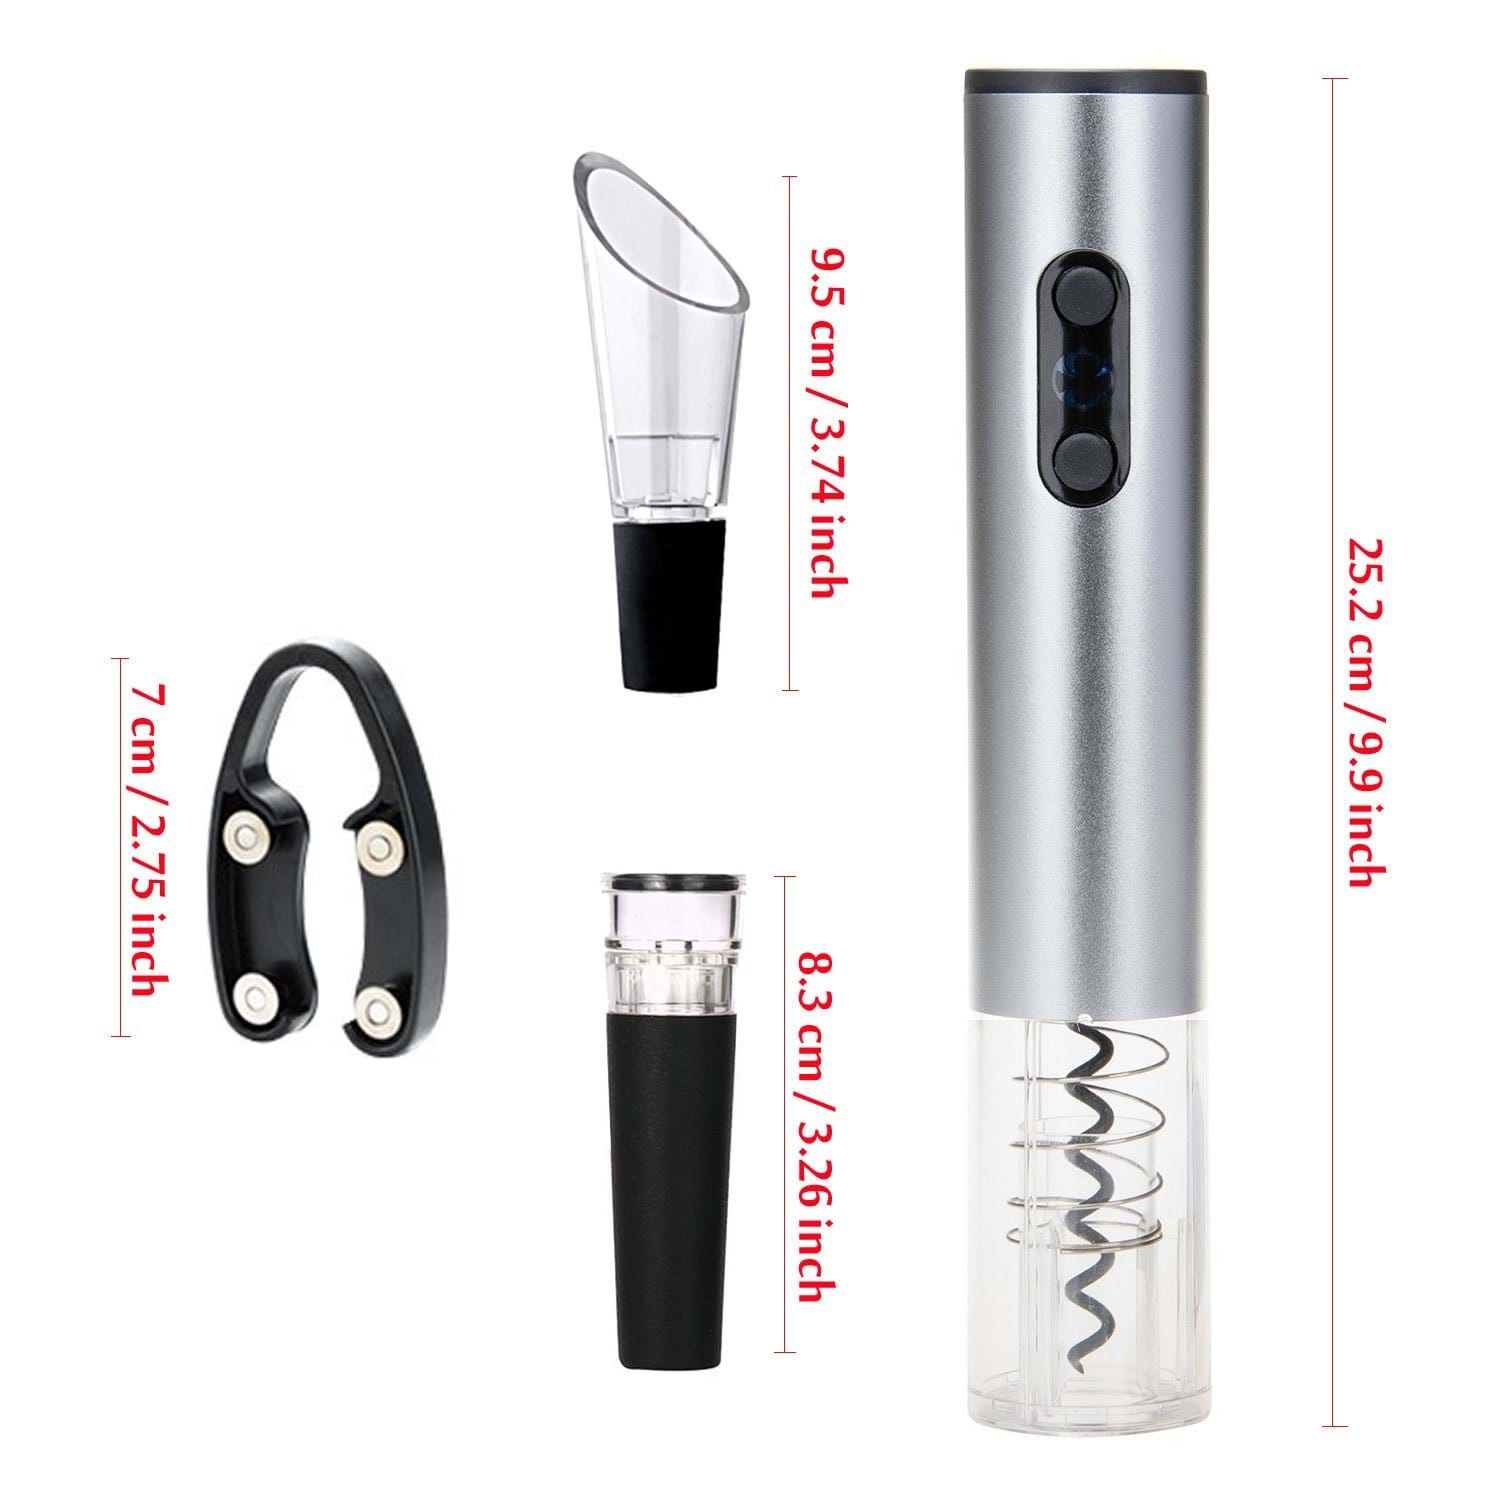 Image of an electric opener for wine bottles